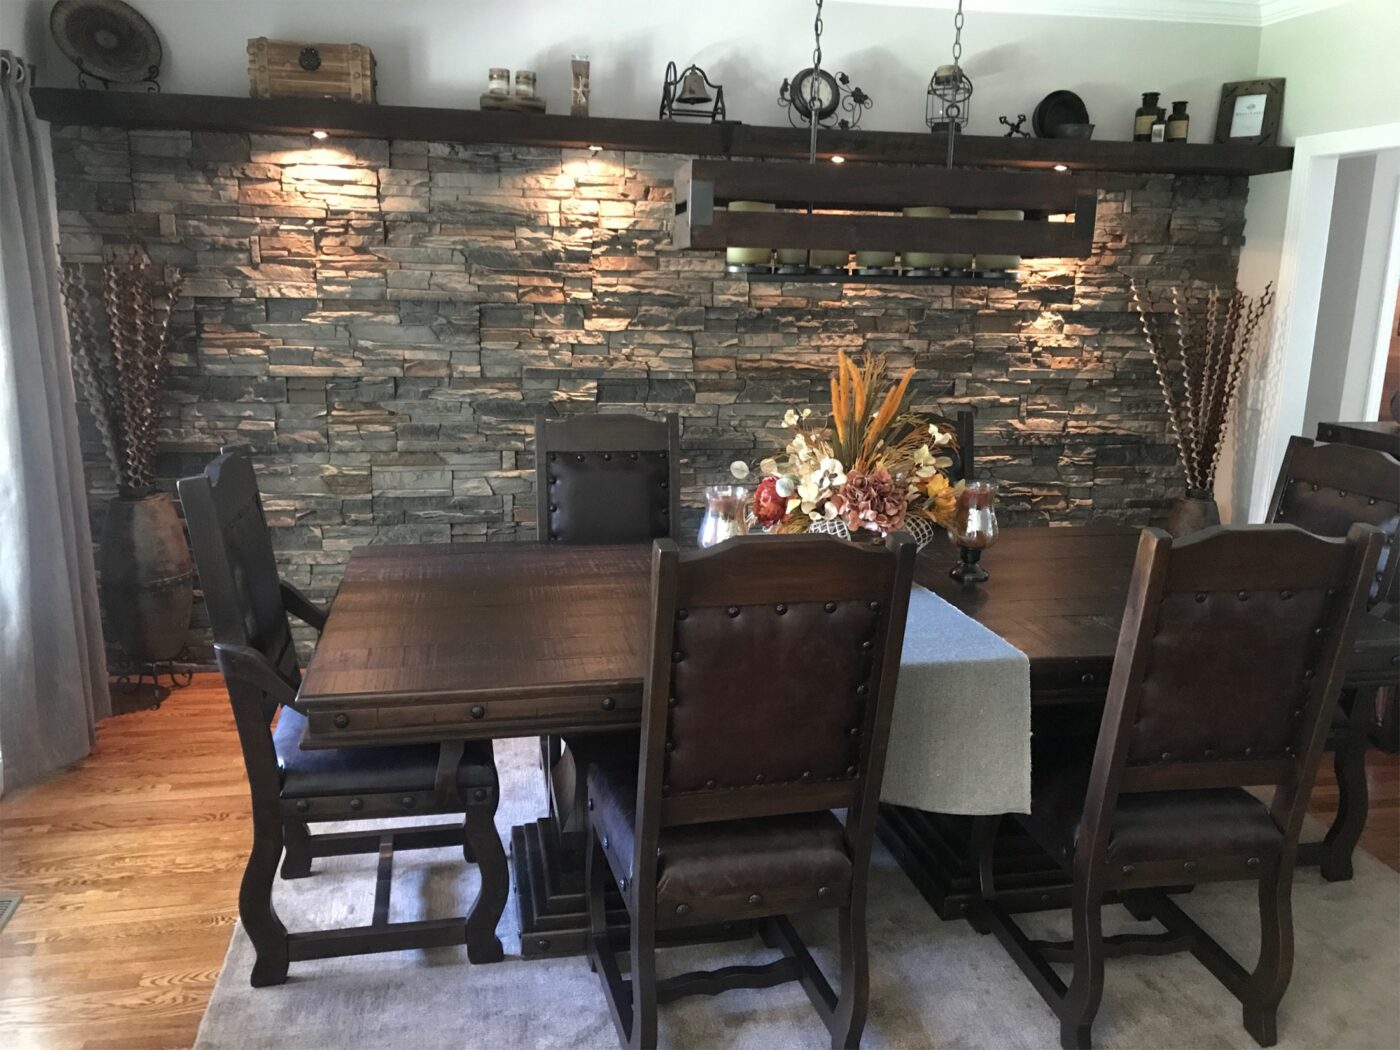 A dining room interior accent wall project completed with Kenai Stacked Stone panels.